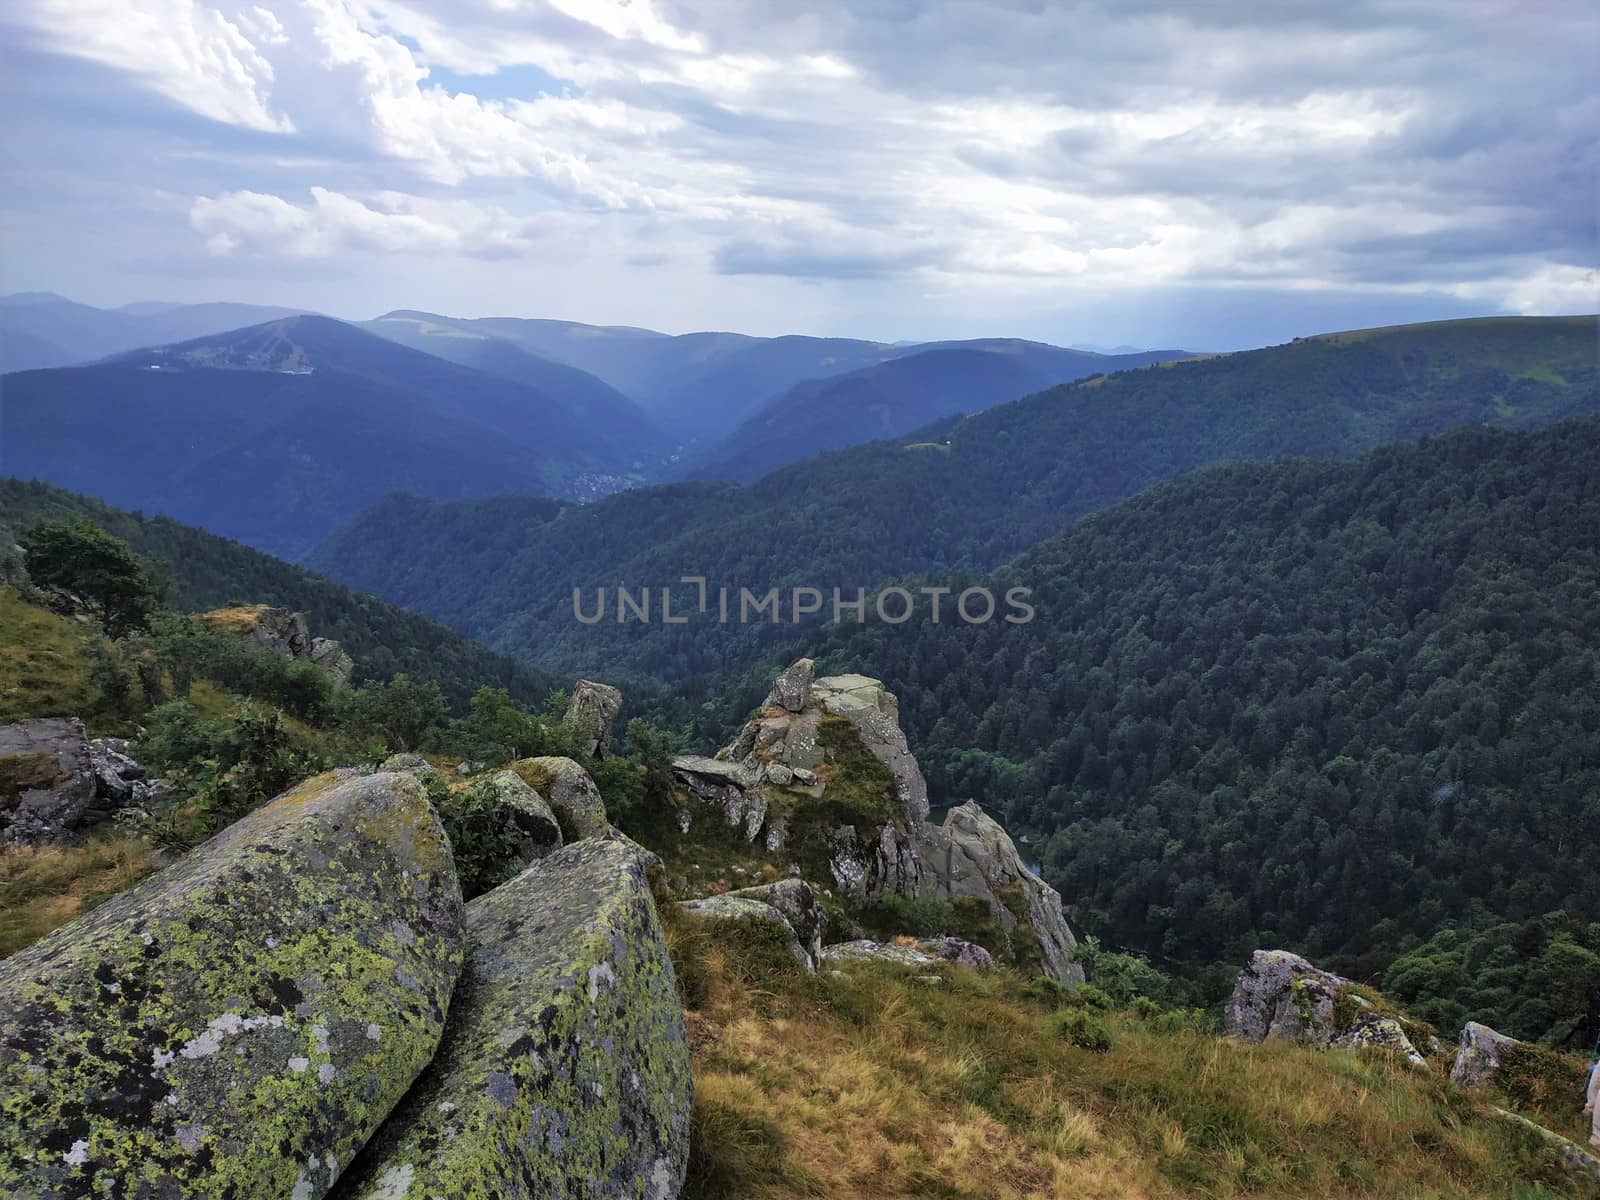 View over the hilly landscape of the Vosges, France